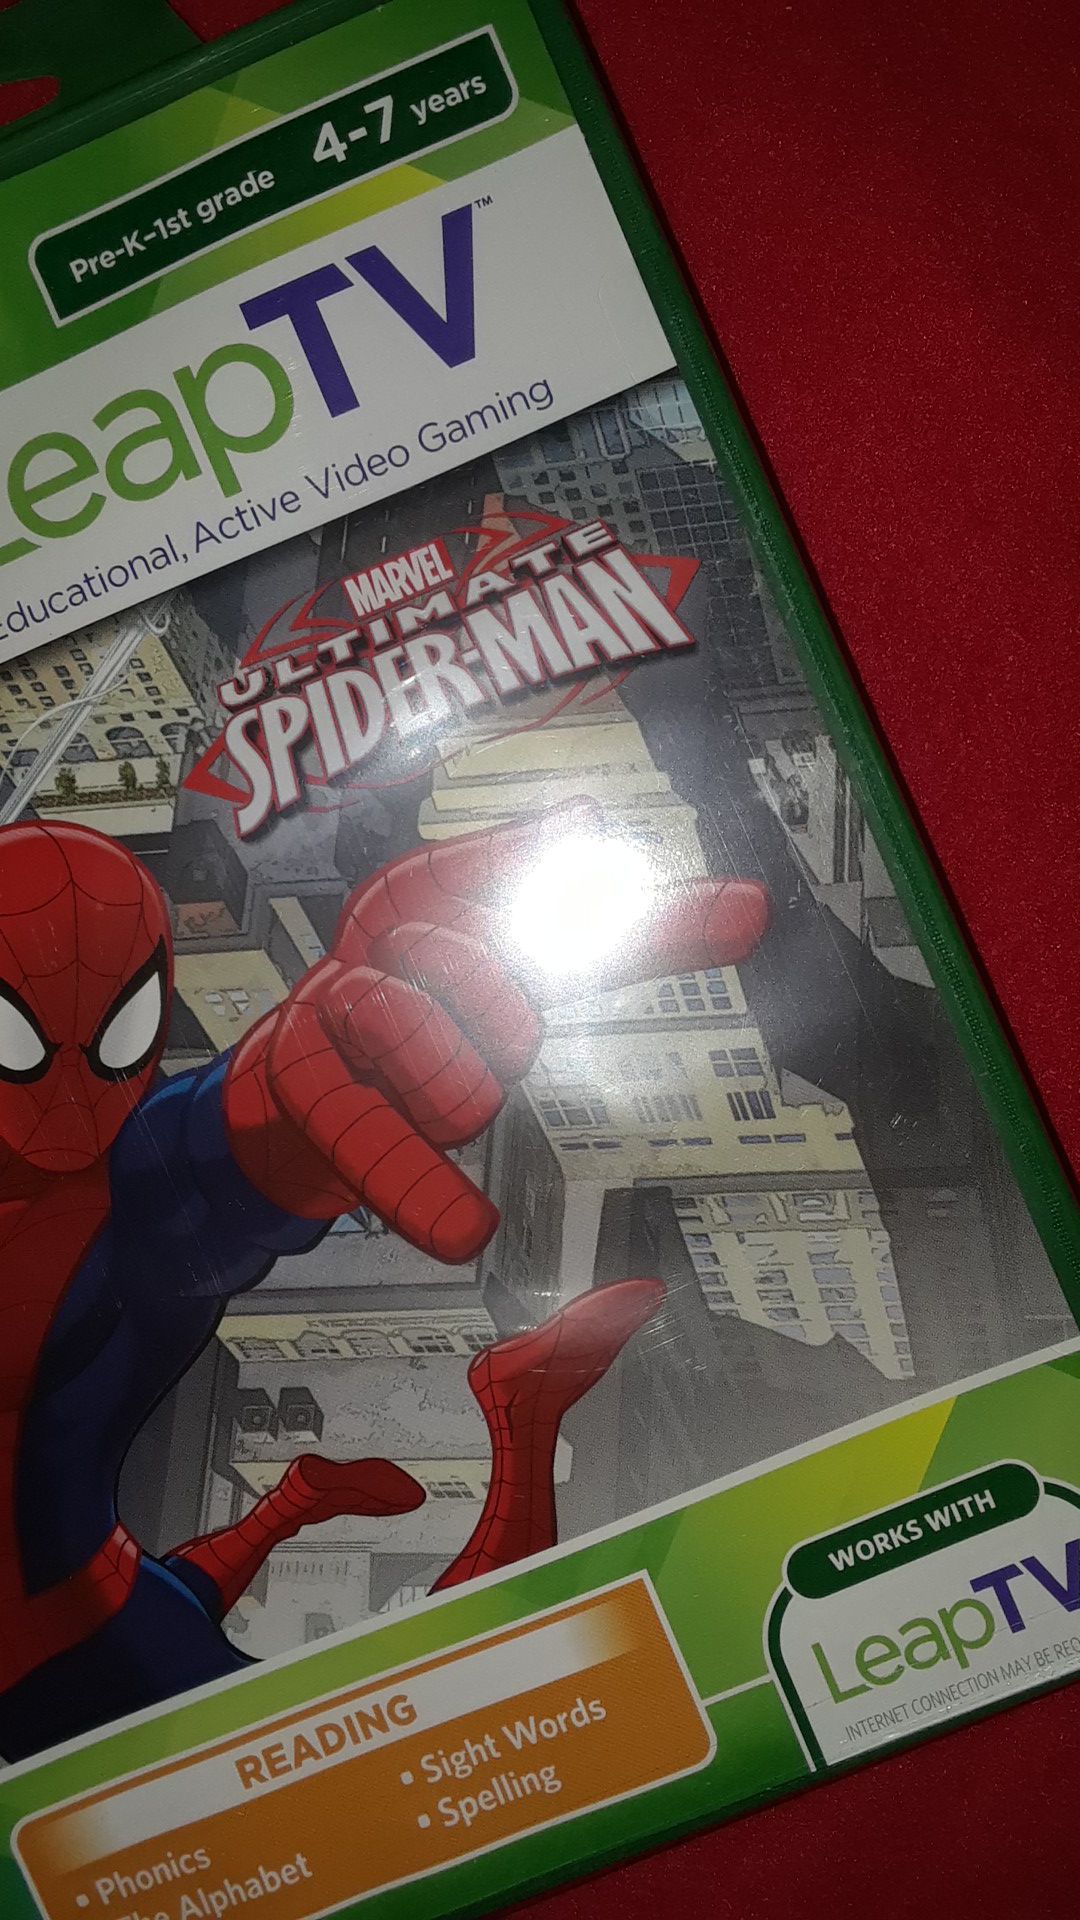 Spider man leaptv game for kids 4_7 years old